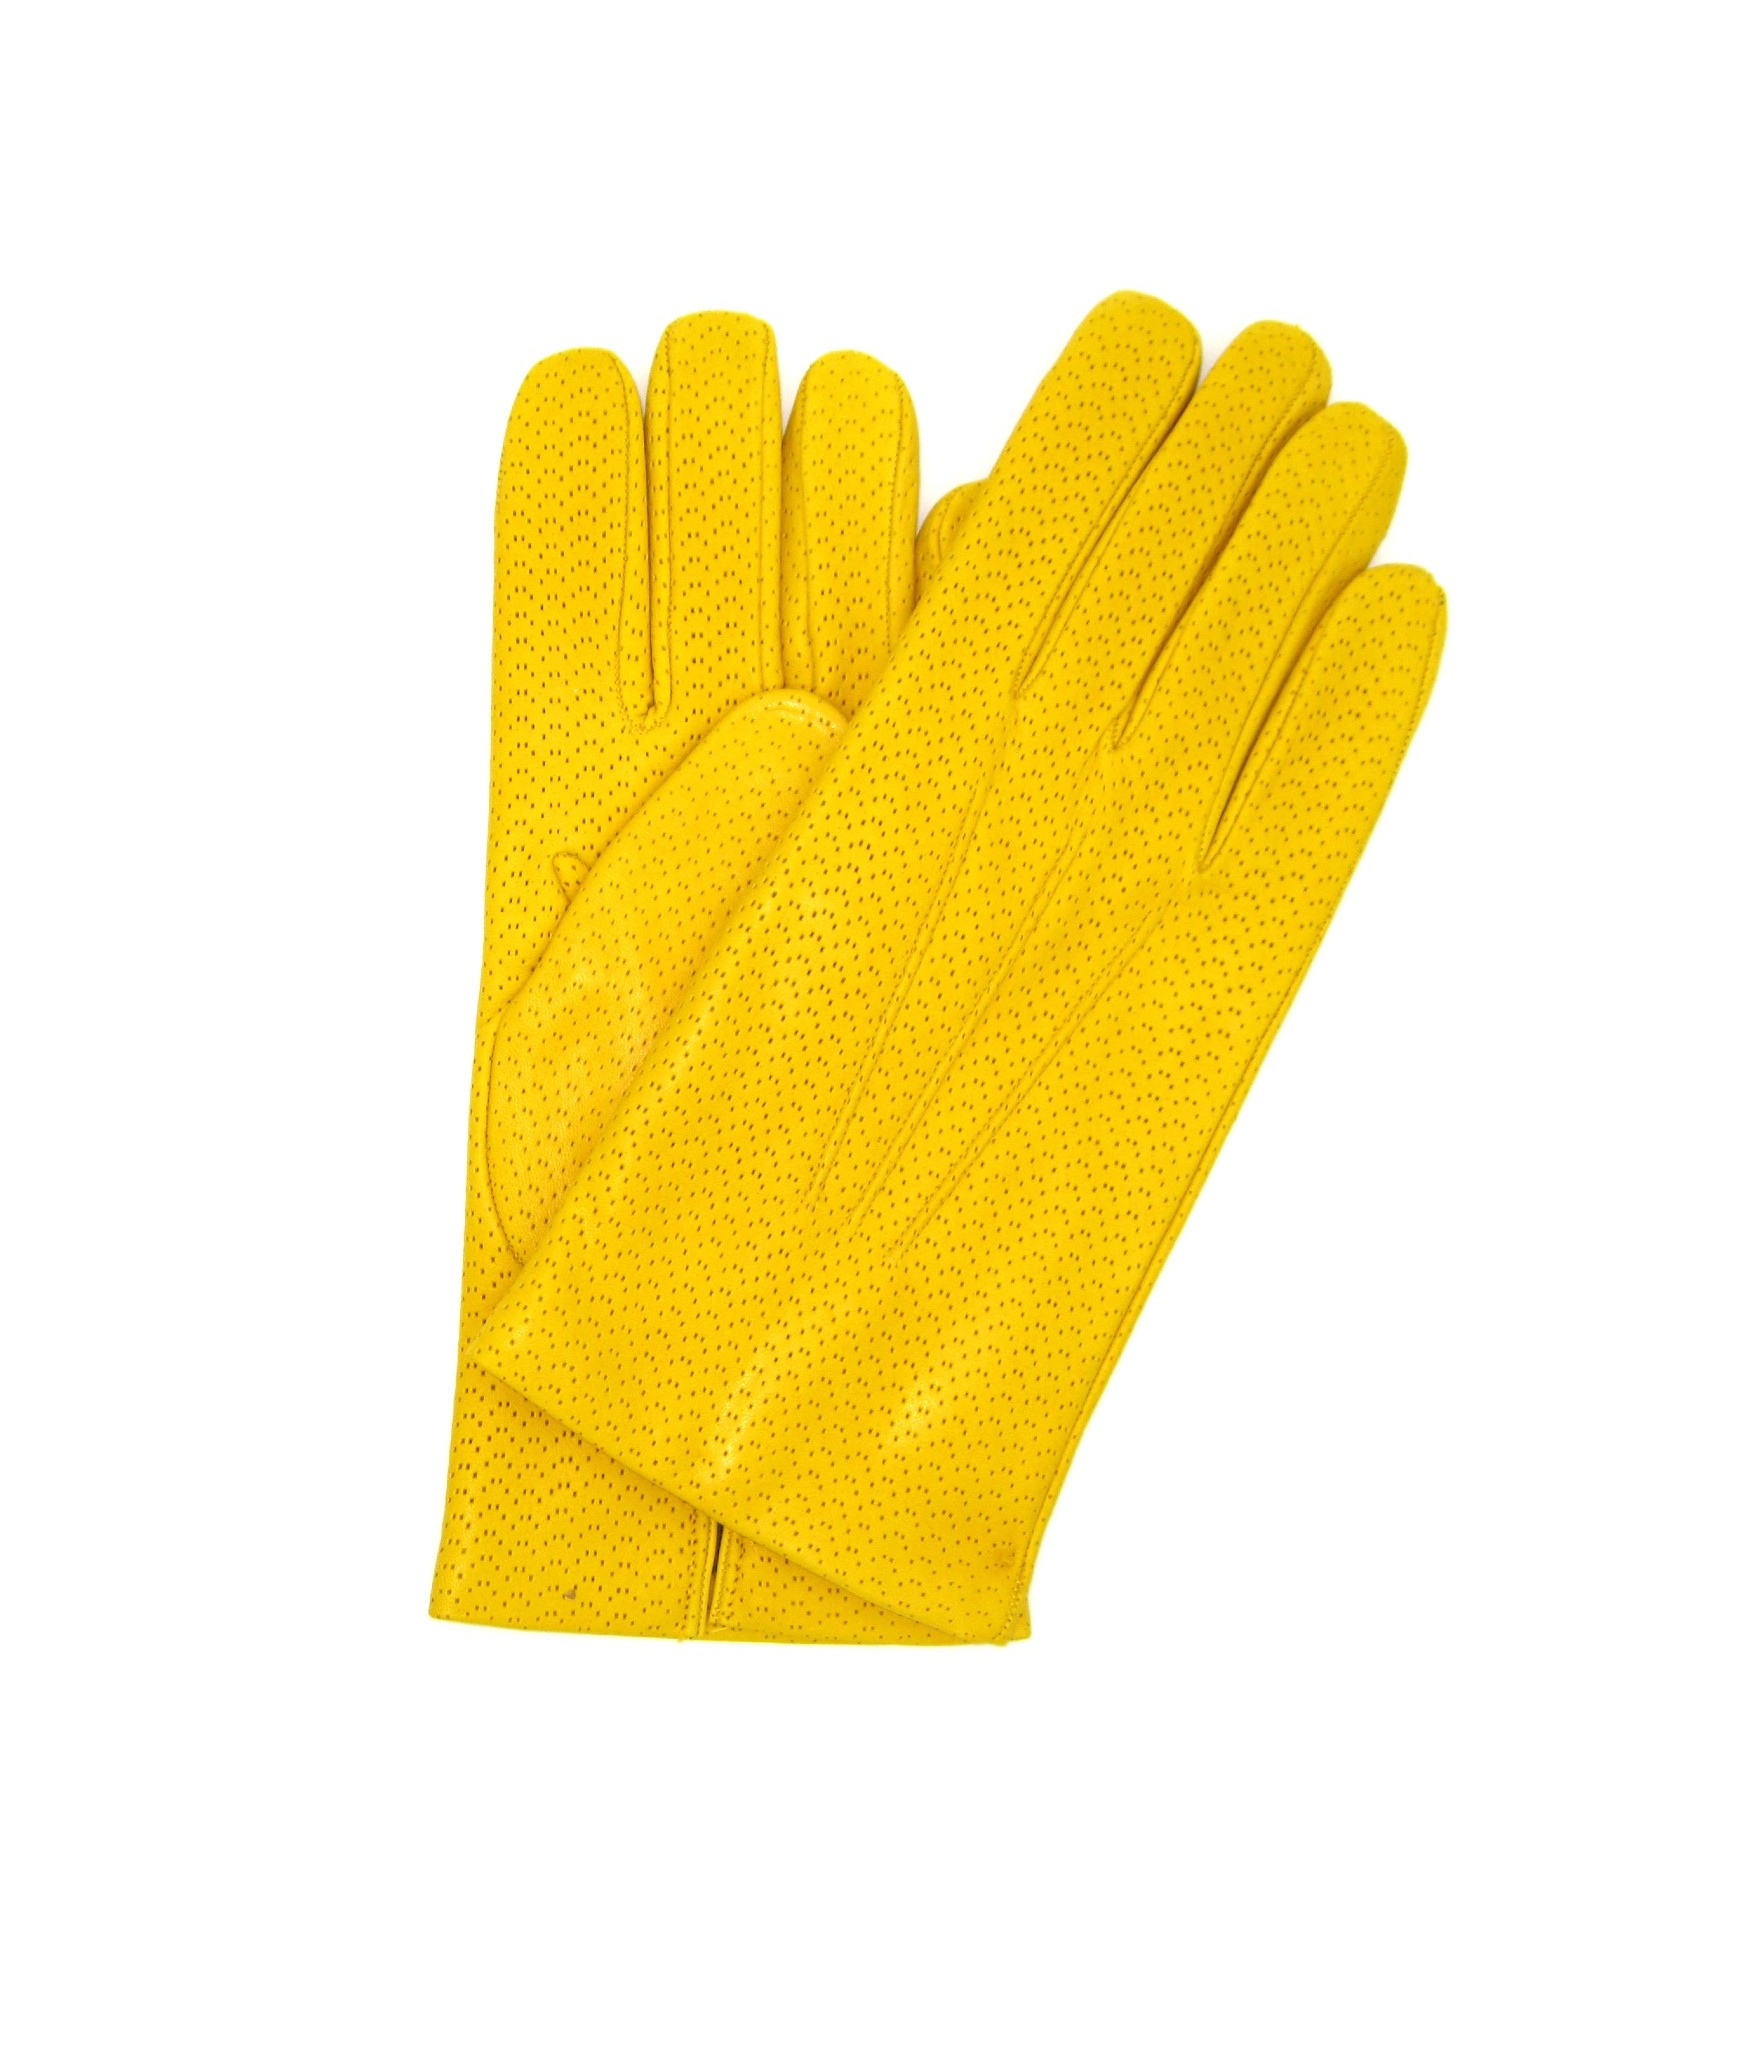 Uomo Easy Going Nappa leather gloves 2bt,cashmere lined Yellow